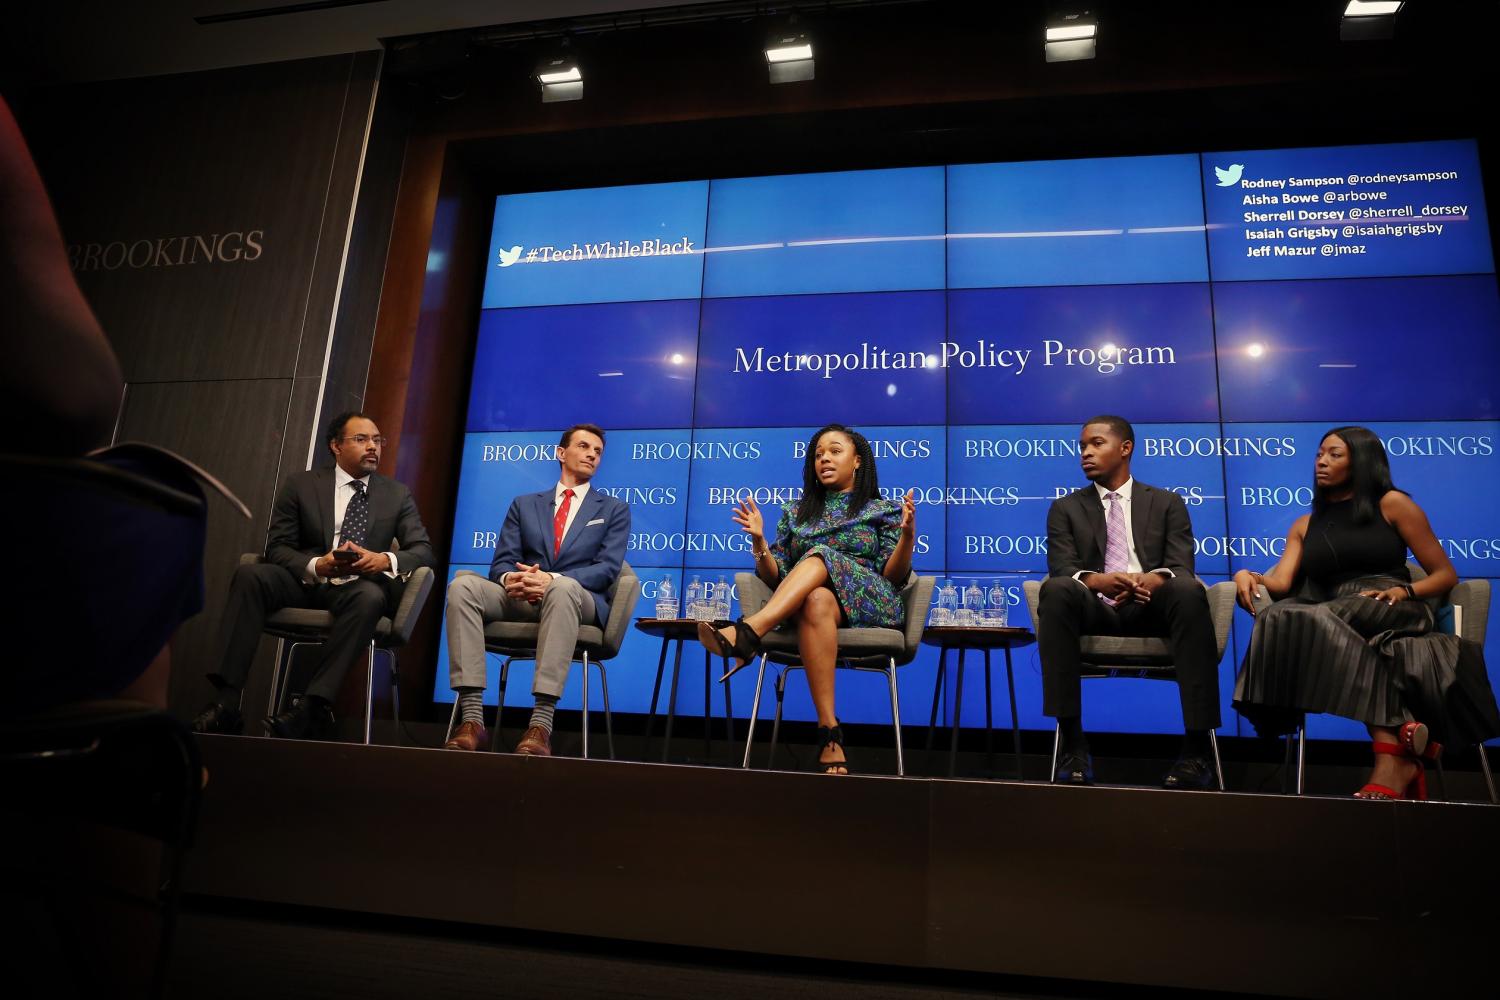 Brookings Metropolitan Policy Programs hosts 'Advancing opportunity for black collegians in tech and business' Friday, May 4, 2018 in Washington with moderator Andre M. Perry, the David M. Rubenstein Fellow; Rodney Sampson, Chairman and Chief Executive Officer of Opportunity Hub; Mark Muro, Senior Fellow and Policy Director; Aisha Bowe, Co-Founder and Chief Executive Officer of STEMBoard; Sherrell Dorsey, founder of ThePLUGDaily.com; Isaiah Grigsby, Senior at Clark Atlanta University OHUB@ Campus Chapter Developer; Jeff Mazur, Executive Director of LaunchCode; Tiffany Bussey, Founding Director of Morehouse College Enterpreneurship Center Lead - Ascend2020 Atlanta; Chanelle Hardy, Strategic Outreach and Public Policy Partnerships at Google; Ronald Mason, University of the District of Columbia President; Chad Womack, National Director for STEM Initiatives at UNCF; and Nicol Turner-Lee. Fellow at Governance Studies, Center for Technology Innovation. (Sharon Farmer/sfphotoworks)